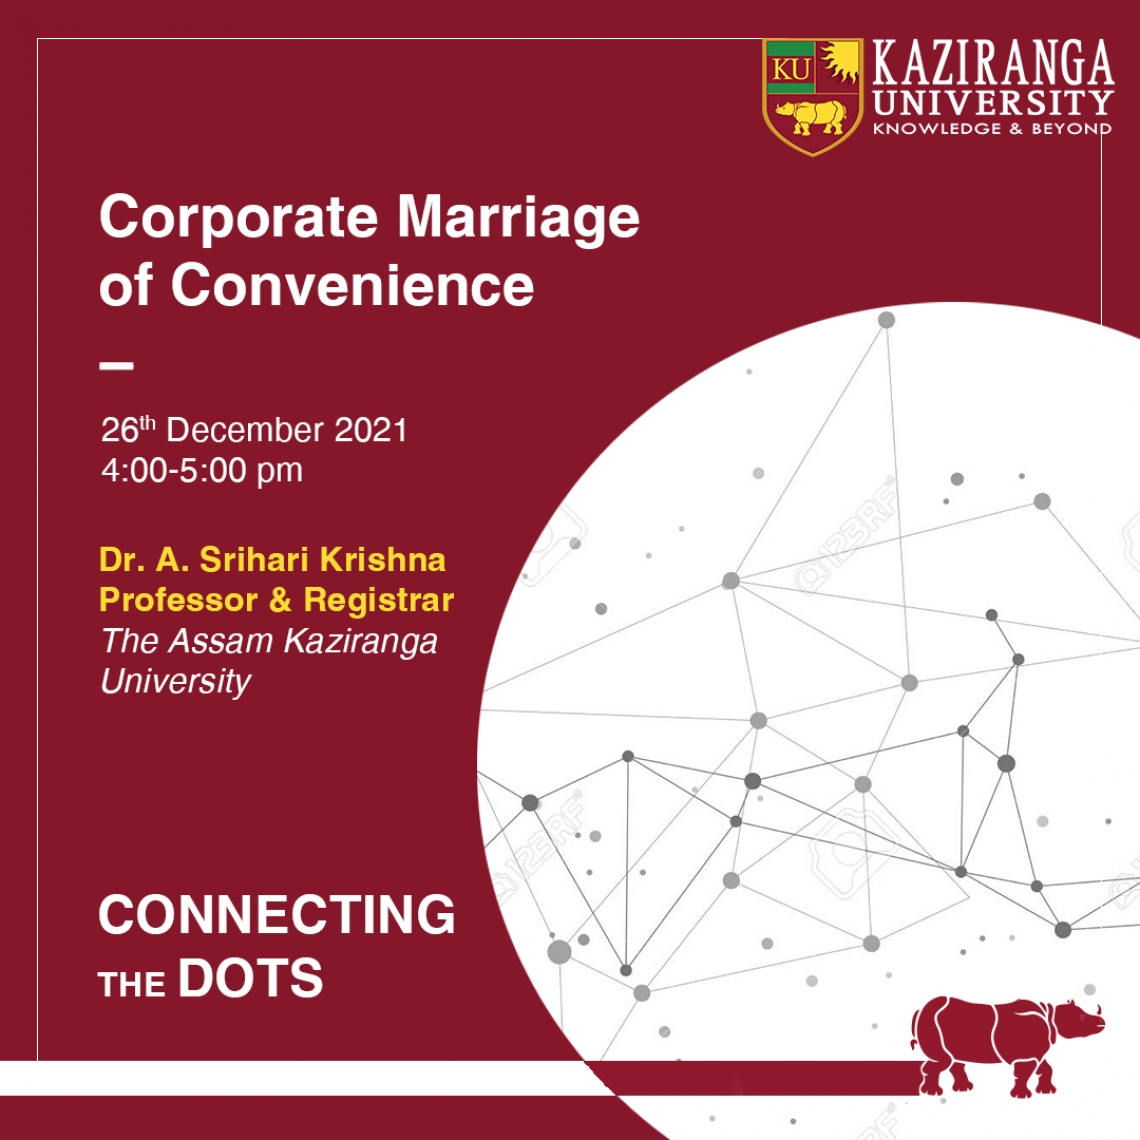 Weekend webinar of Connecting the dots on the topic "Corporate Marriages"